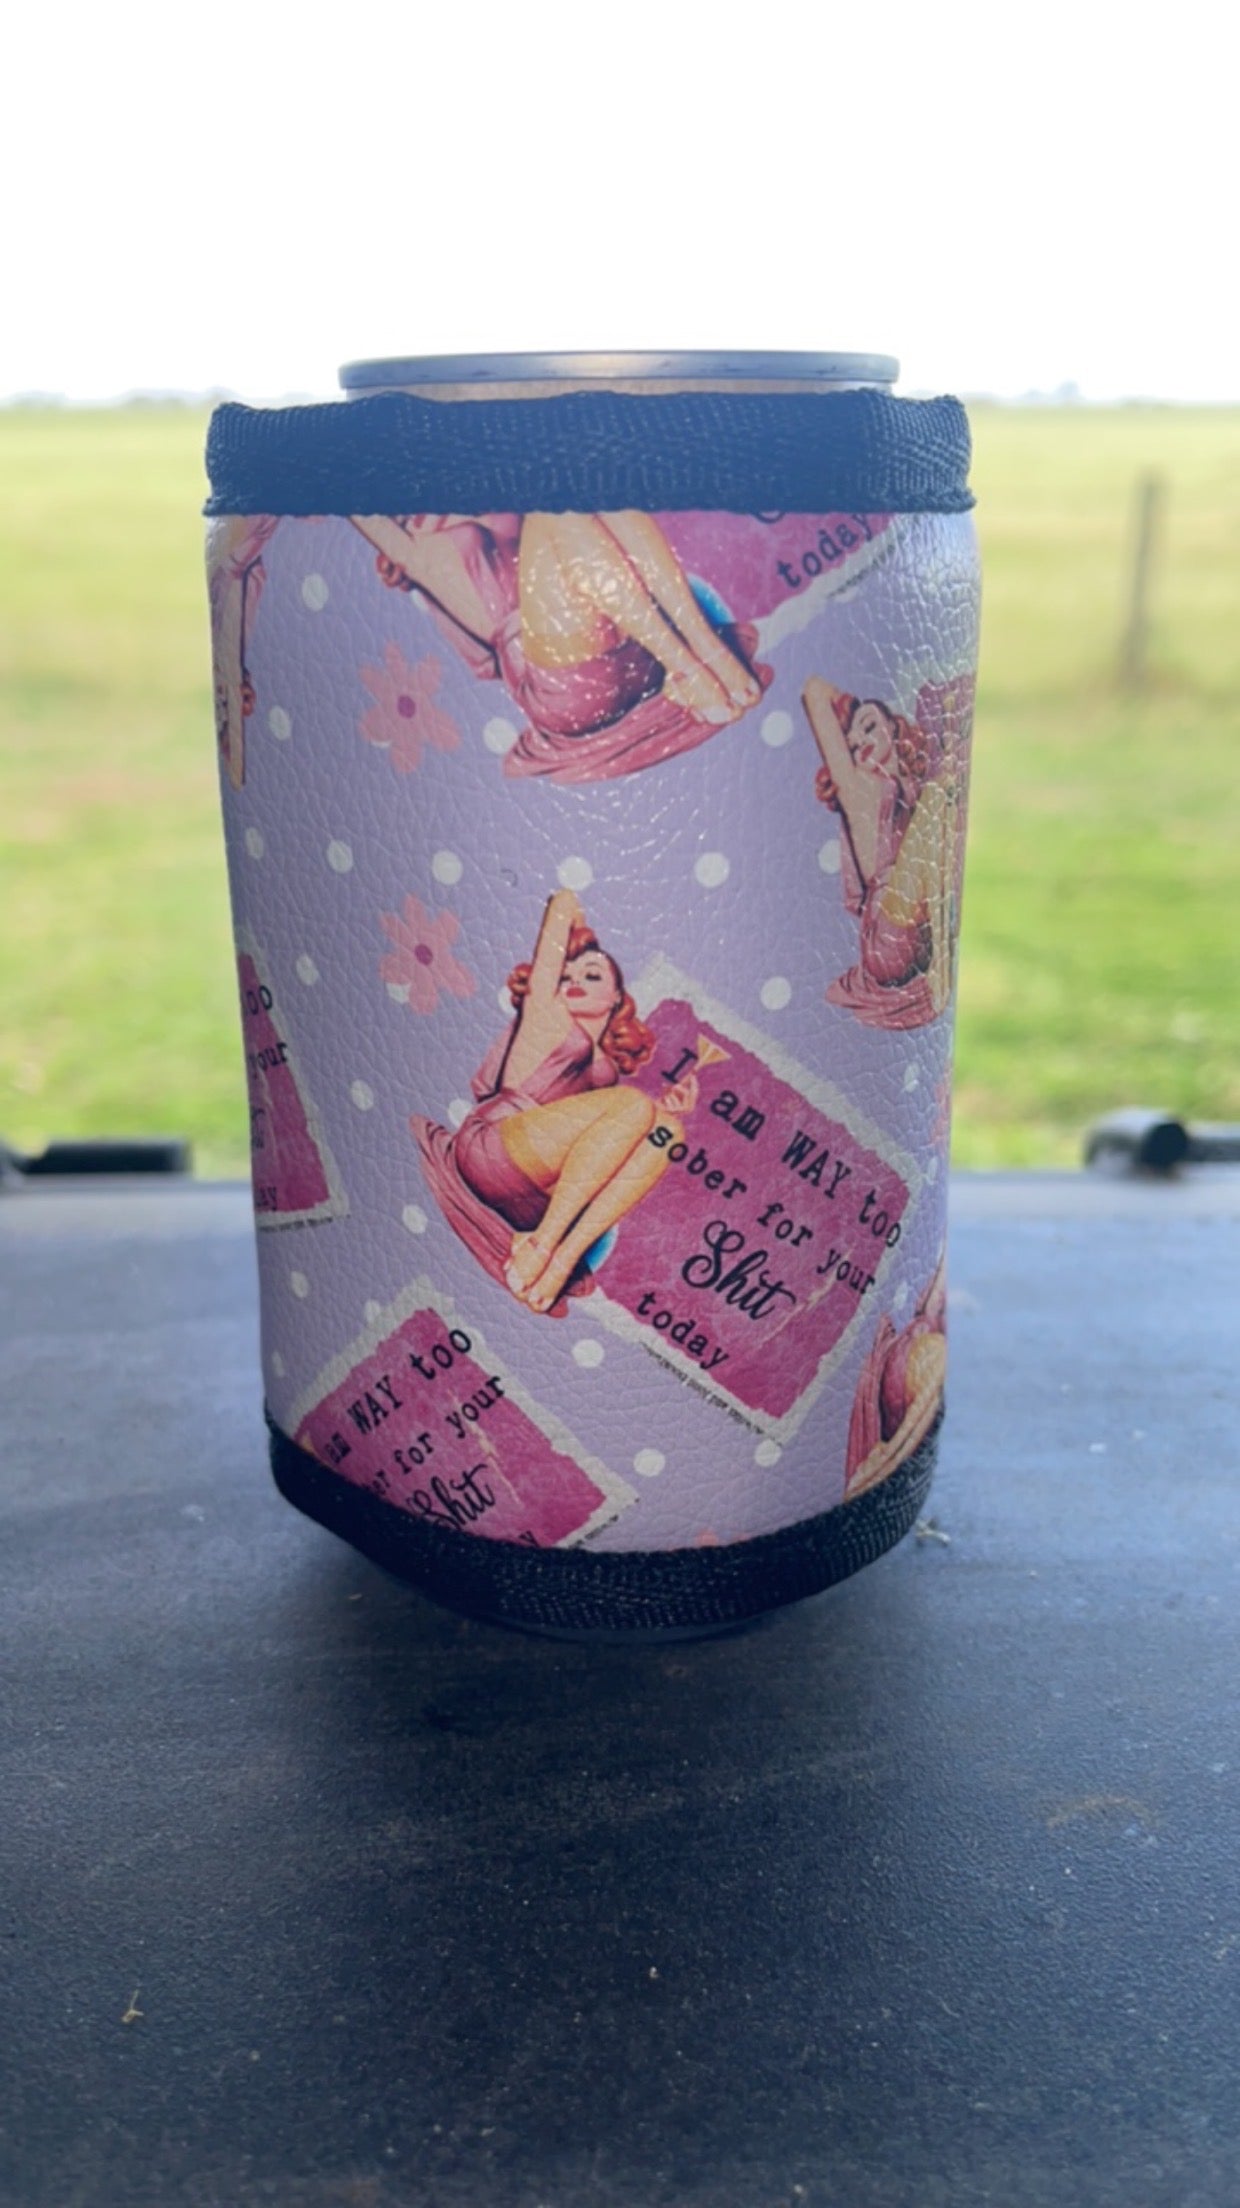 Vinyl Stubby Holder - I’m way to sober for your shit today